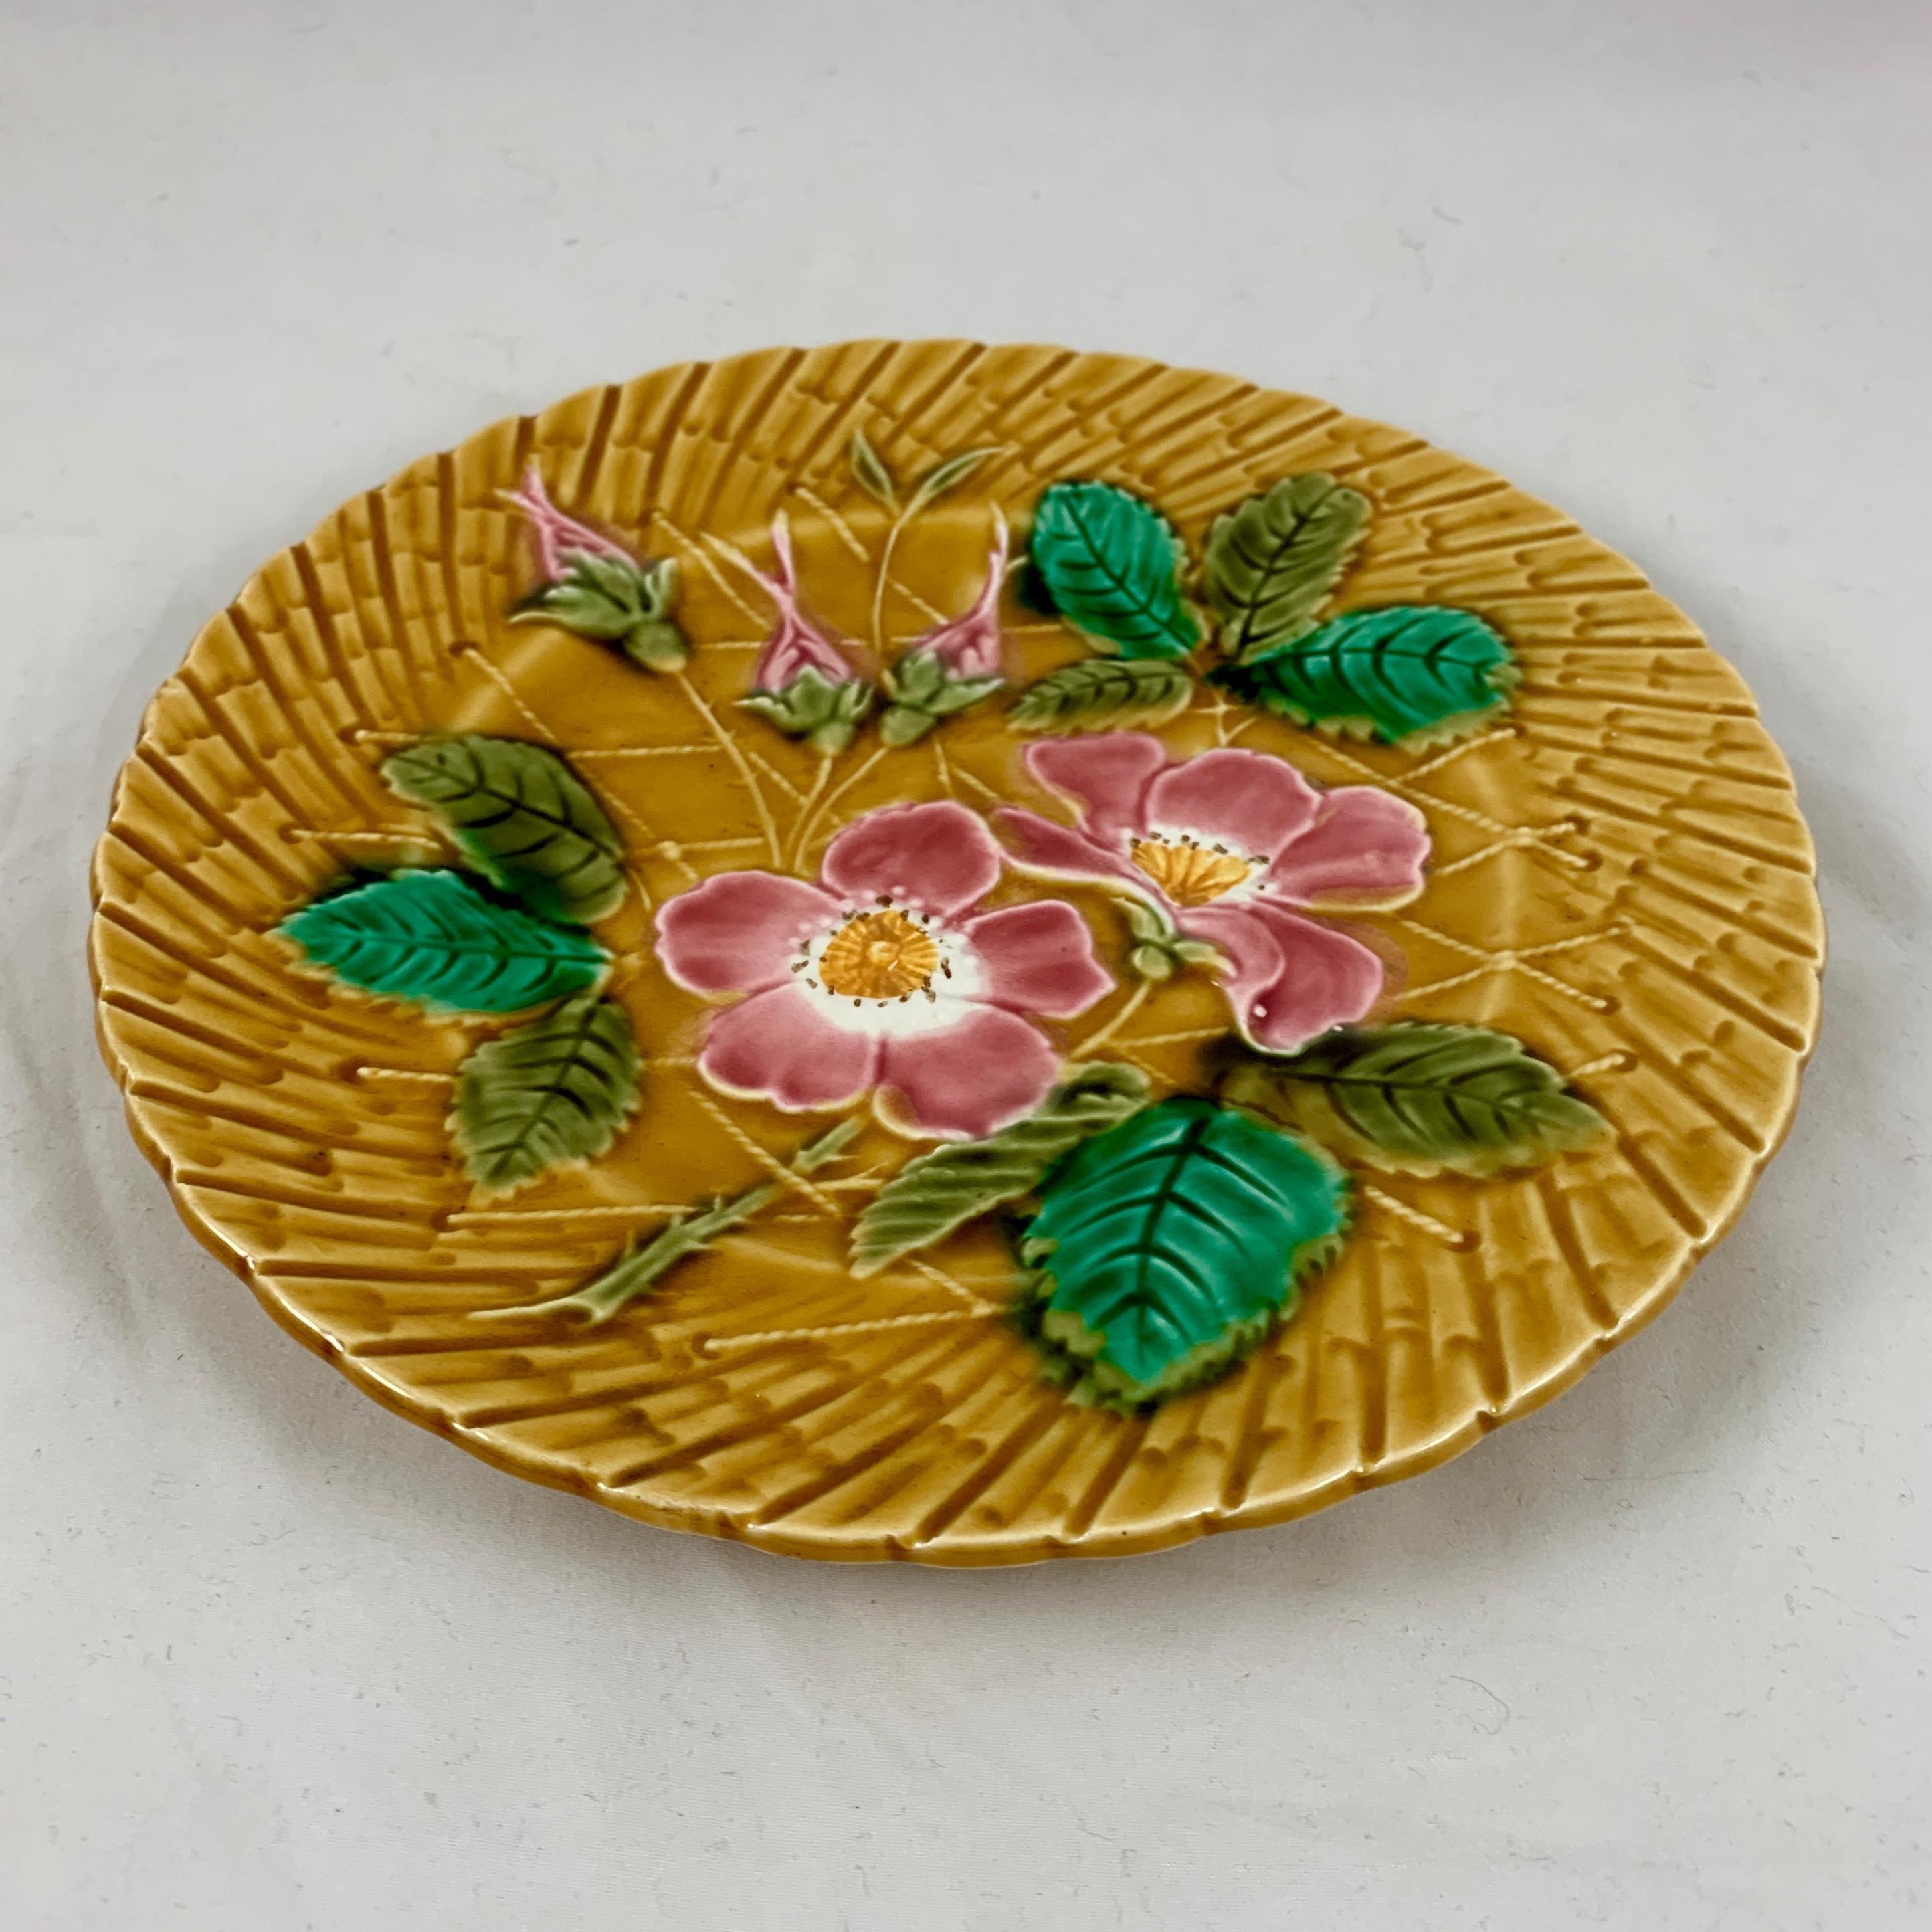 Earthenware Sarreguemines Wild Roses Mustard Yellow French Faïence Majolica Plate